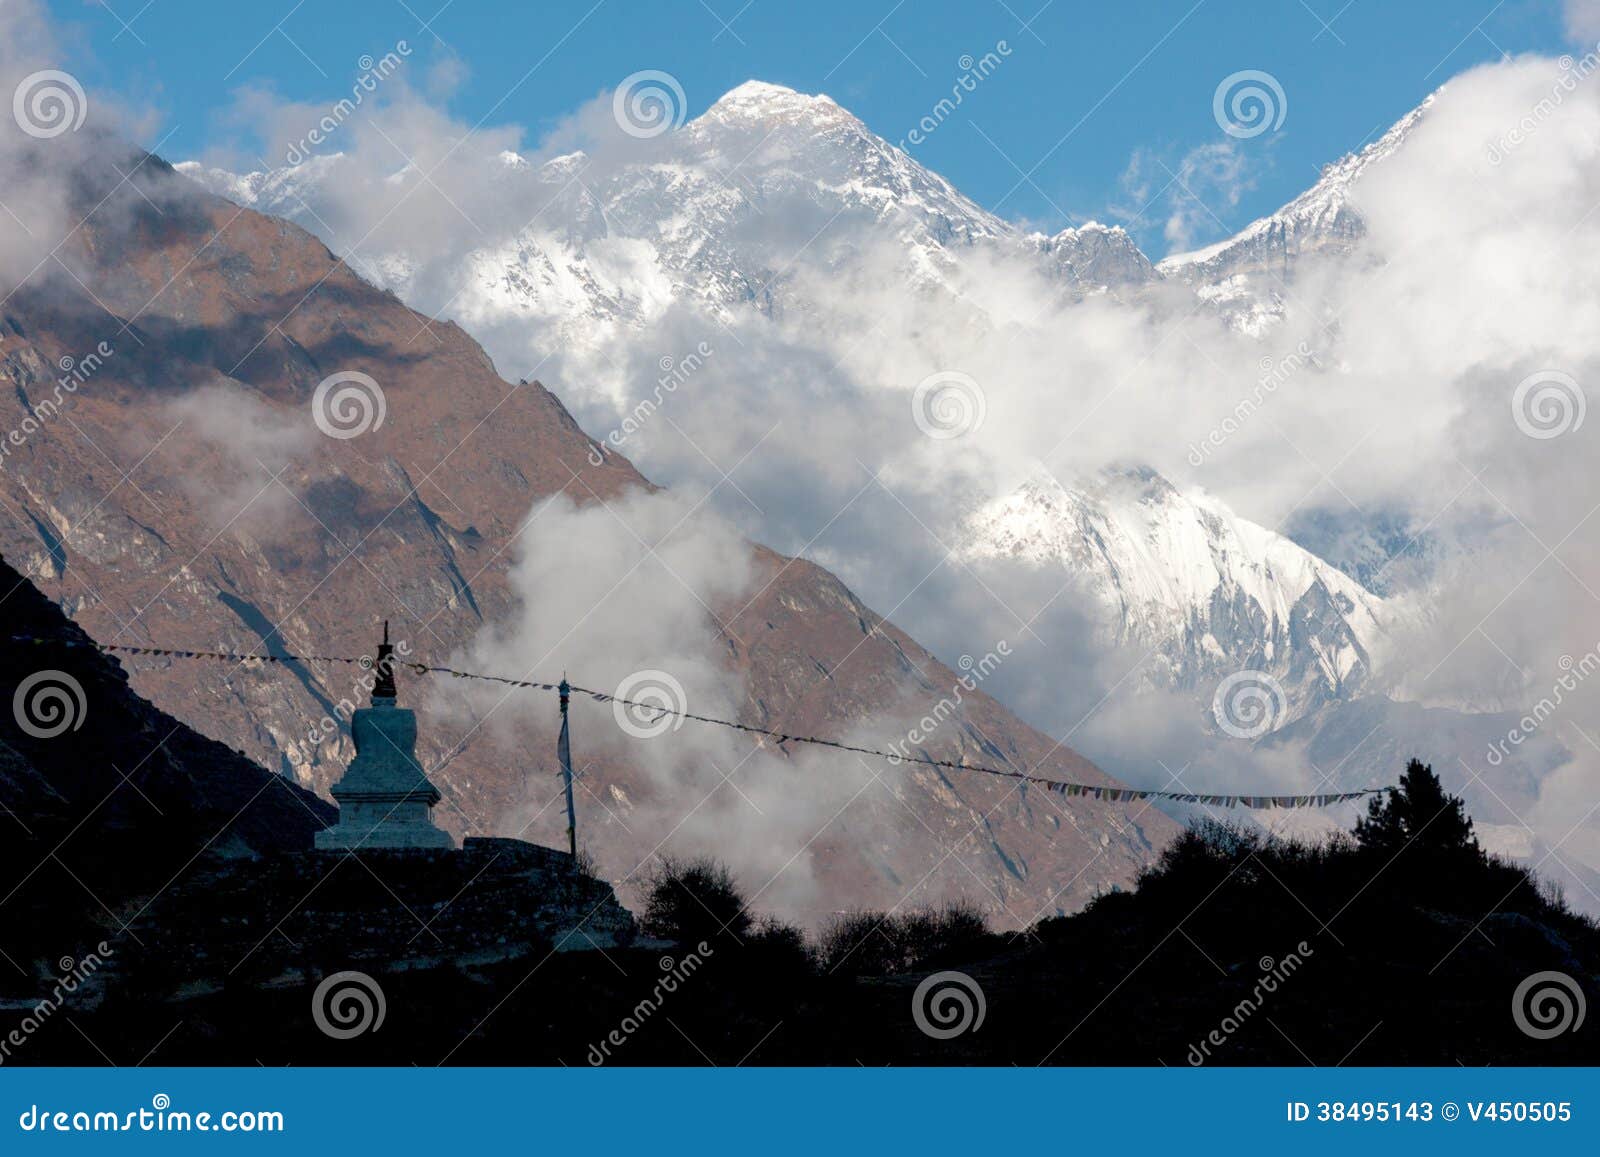 evening view of mt. everest